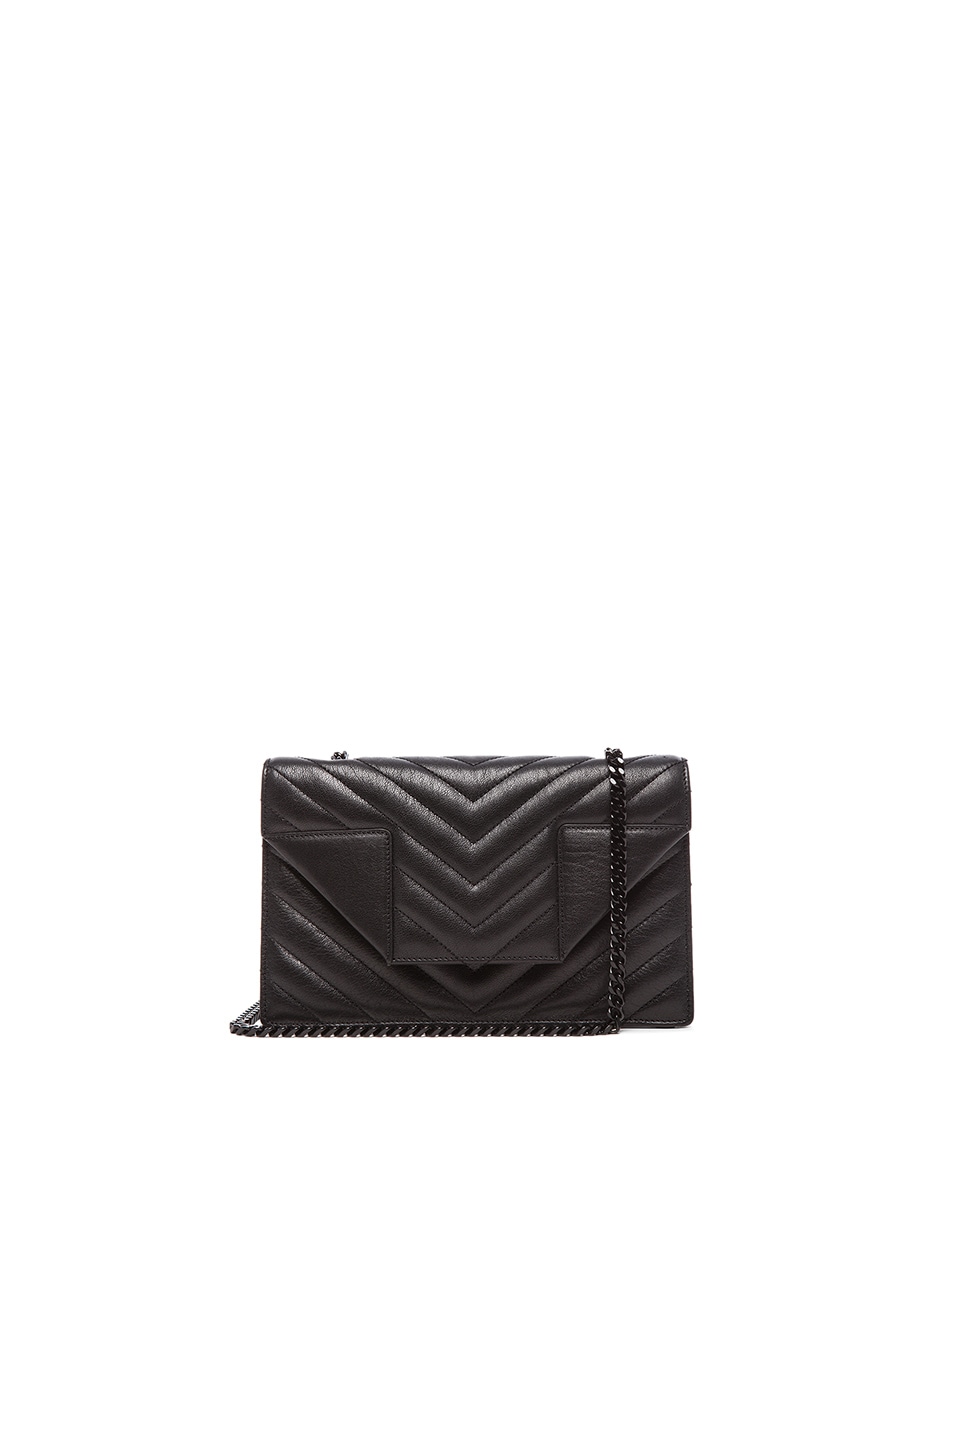 Image 1 of Saint Laurent Small Studded Betty Bag in Black